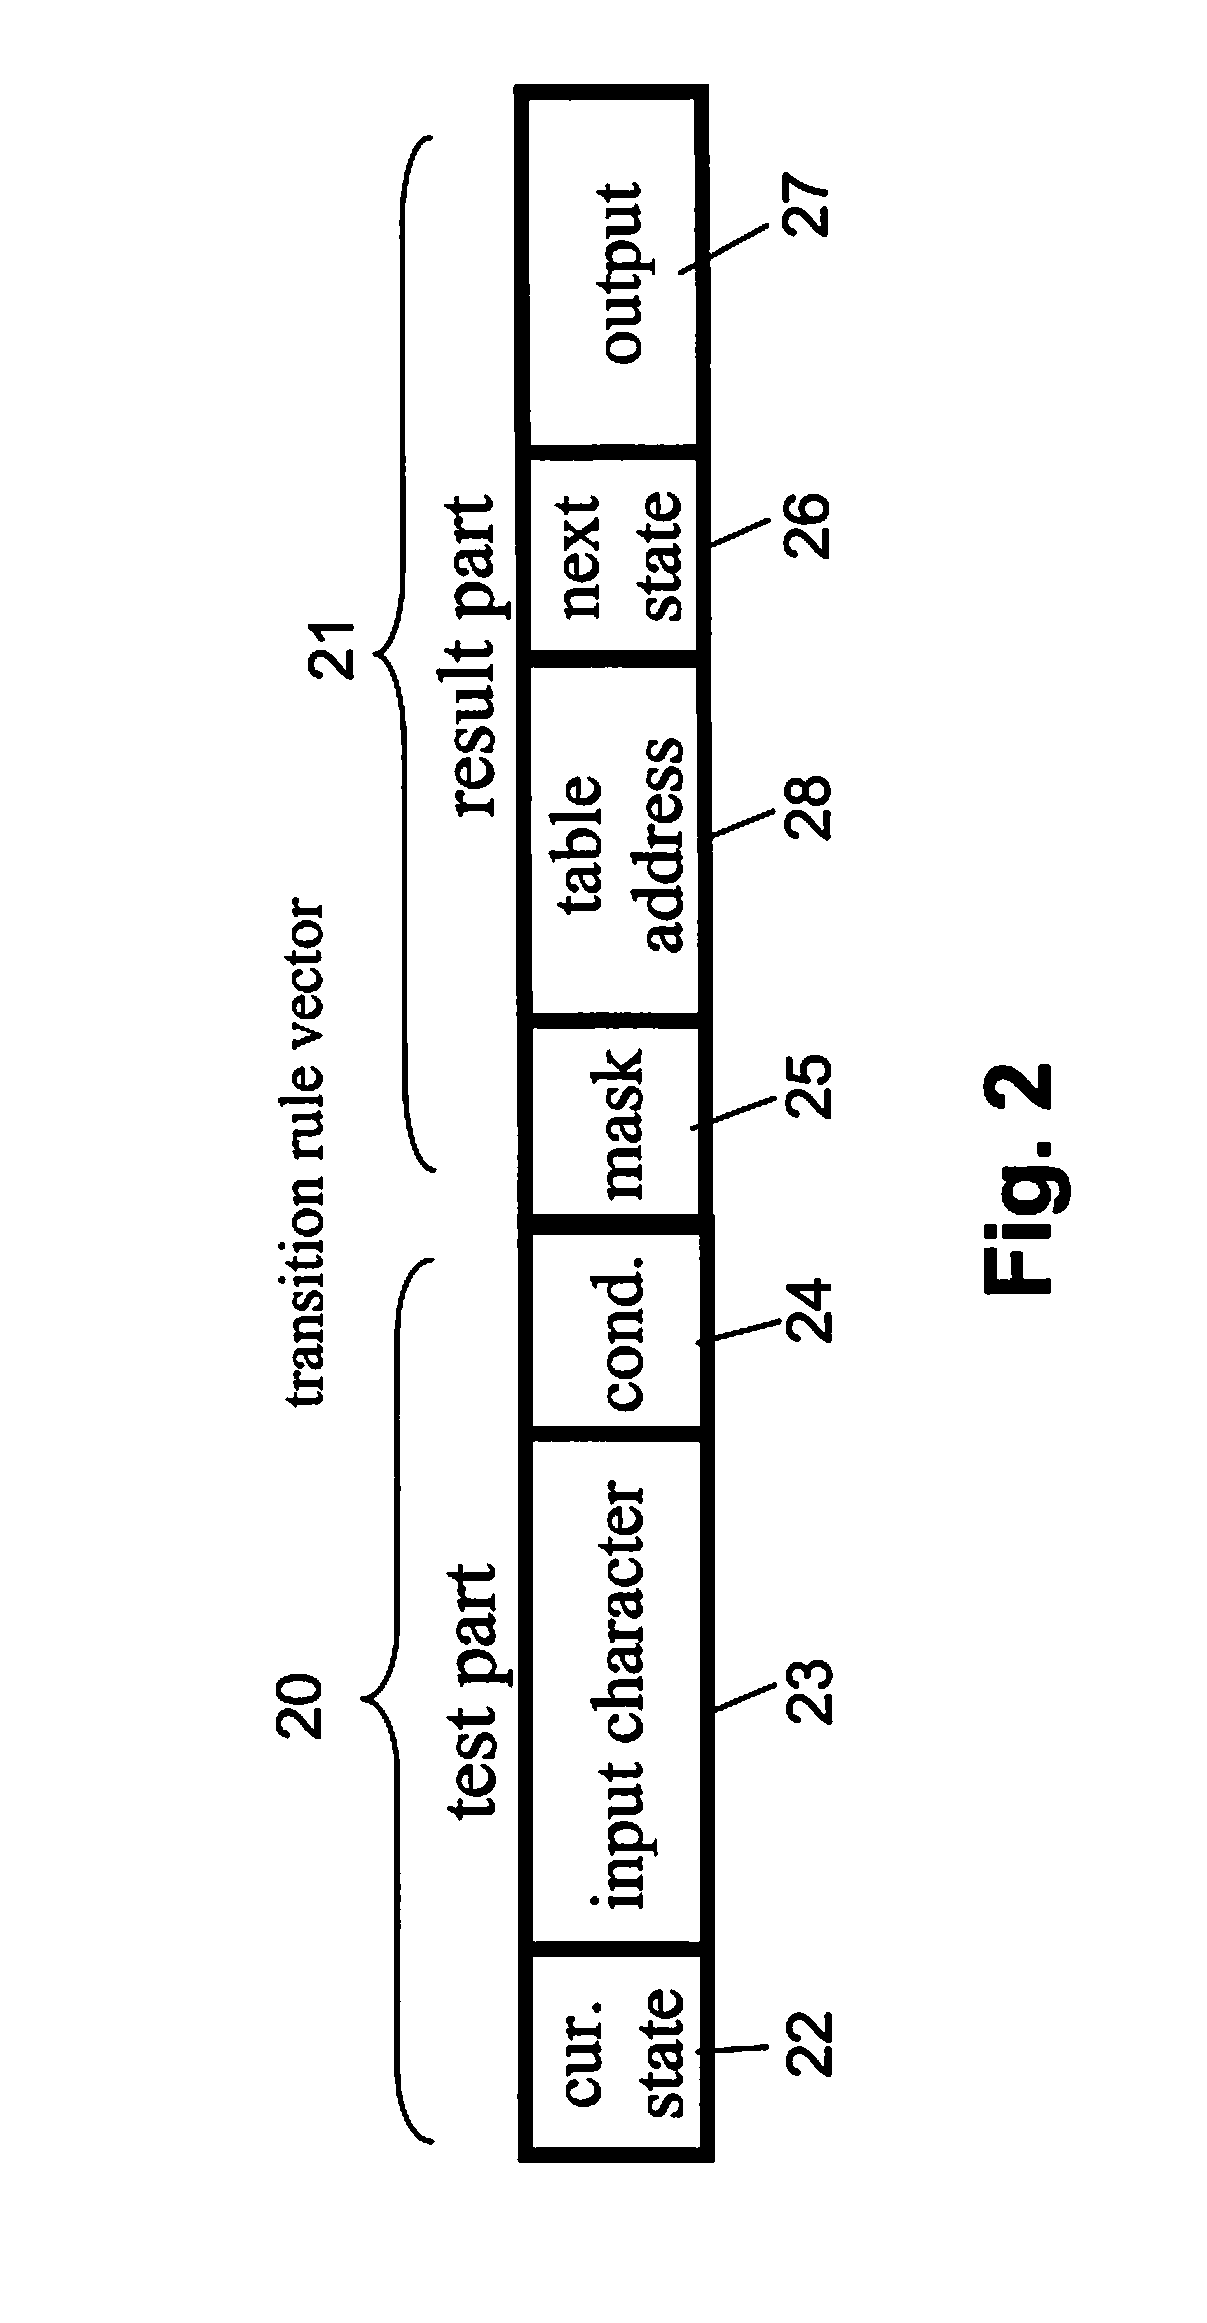 Method and System for Changing a Description for a State Transition Function of a State Machine Engine